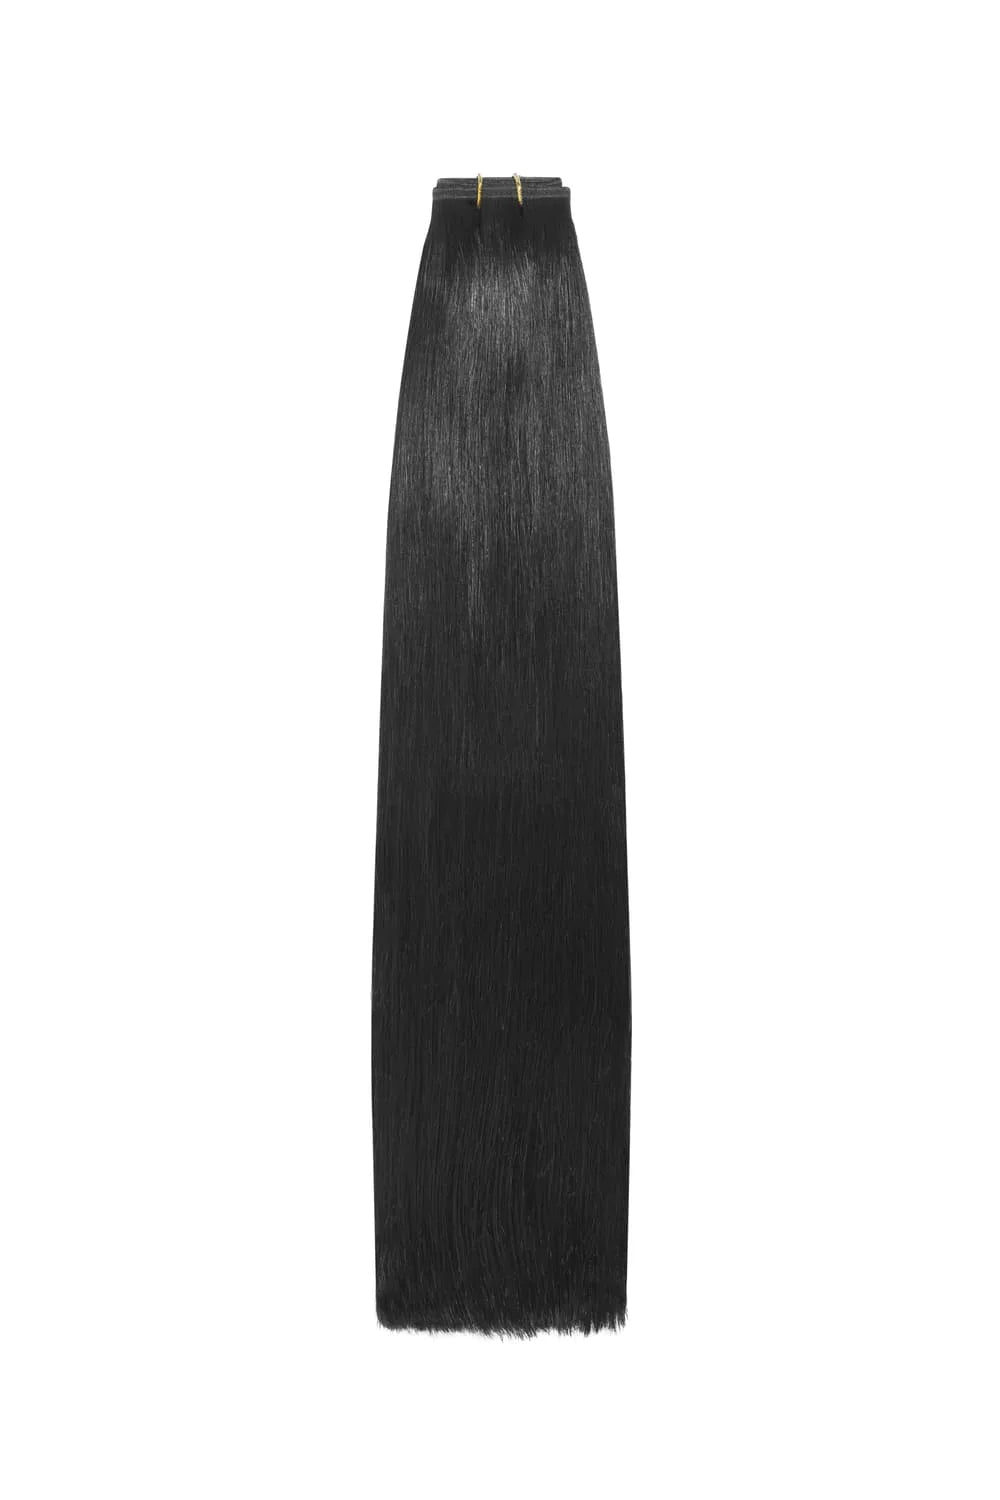 Jet Black (#1) Remy Royale Flat Weft Hair Extensions